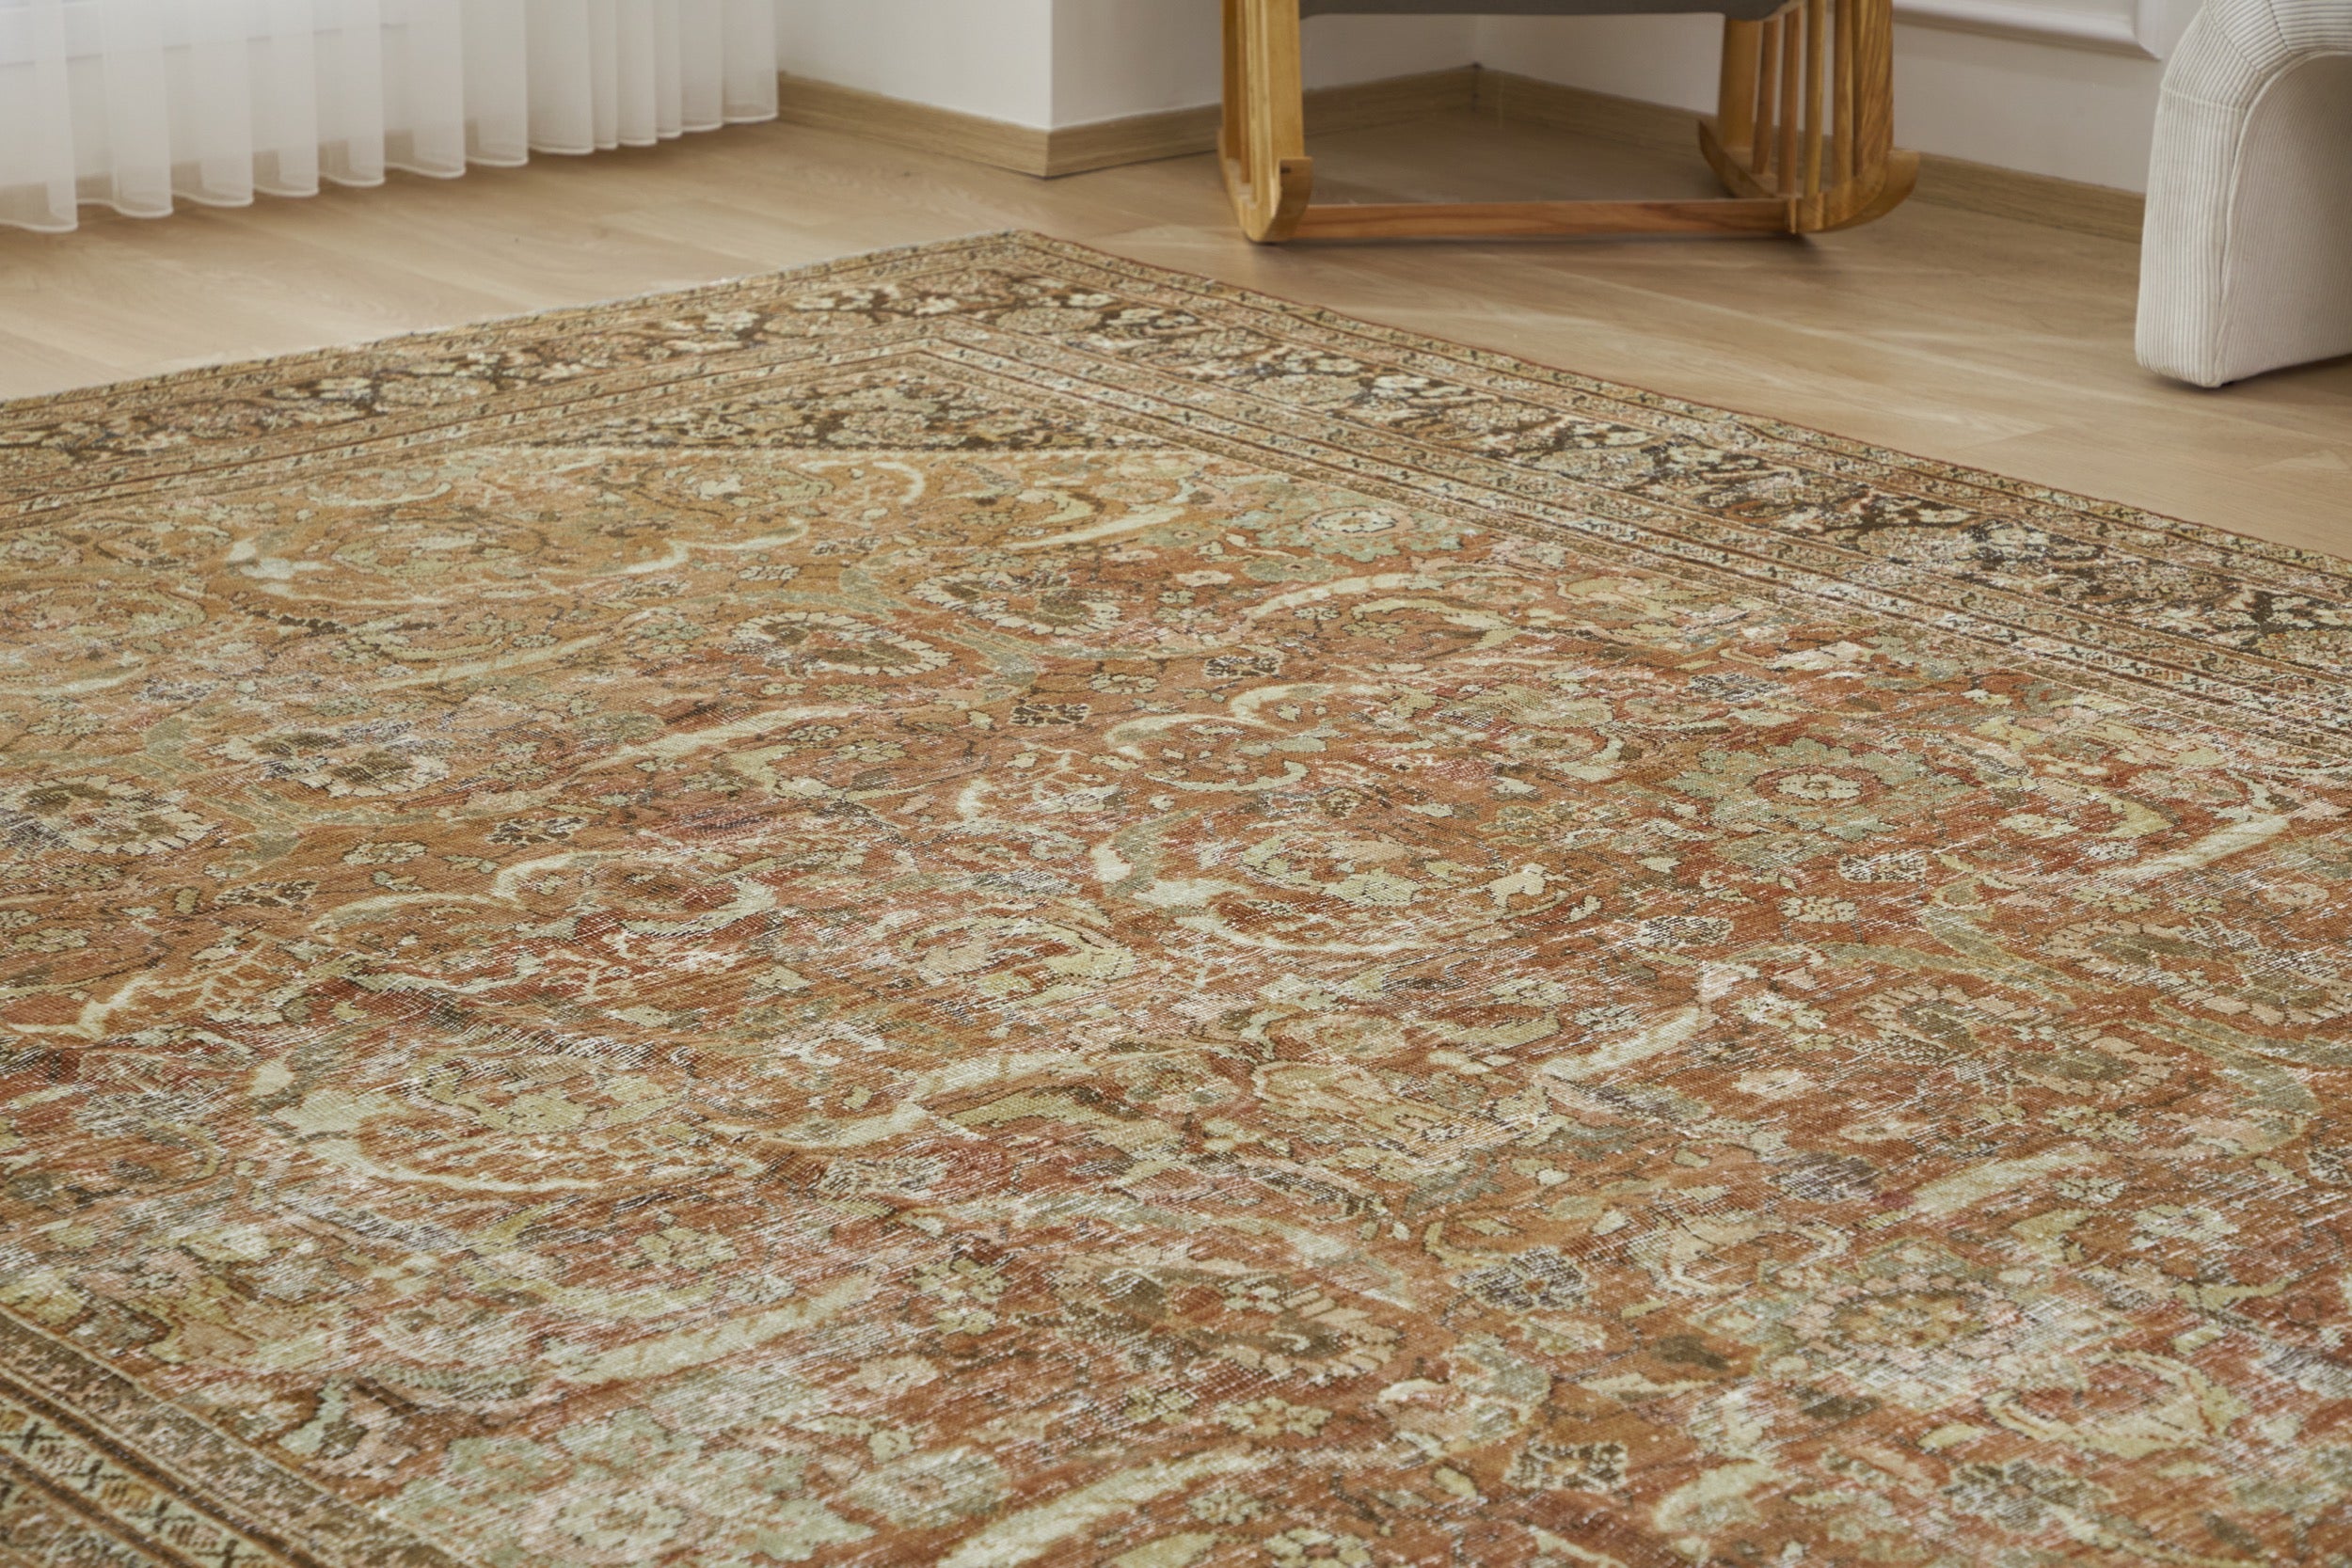 Wihelma - Woven with Tradition | Kuden Rugs